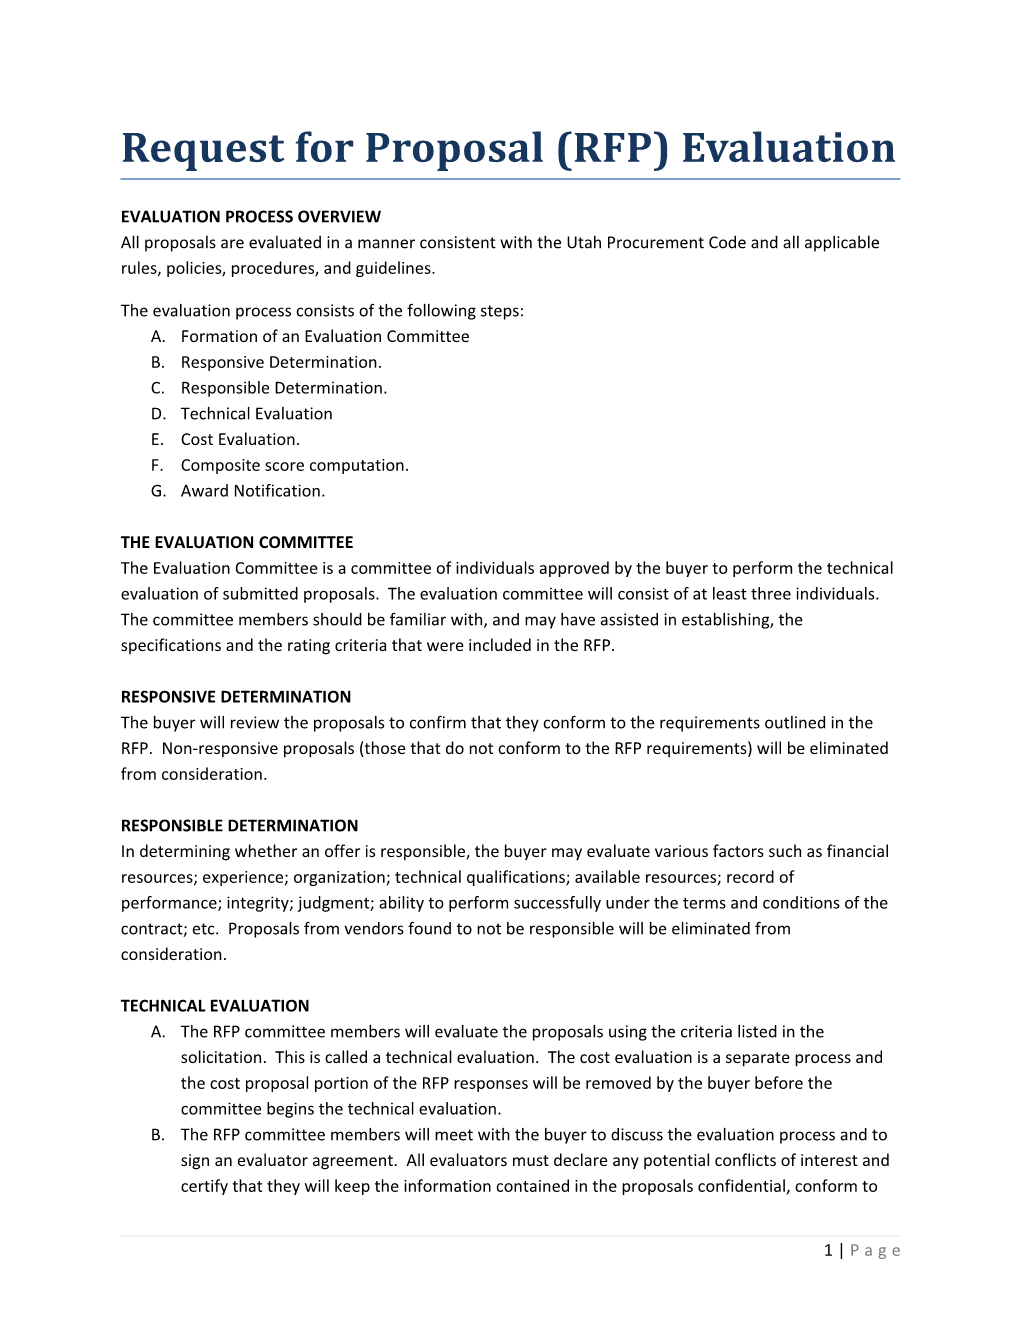 Request for Proposal (RFP) Evaluation